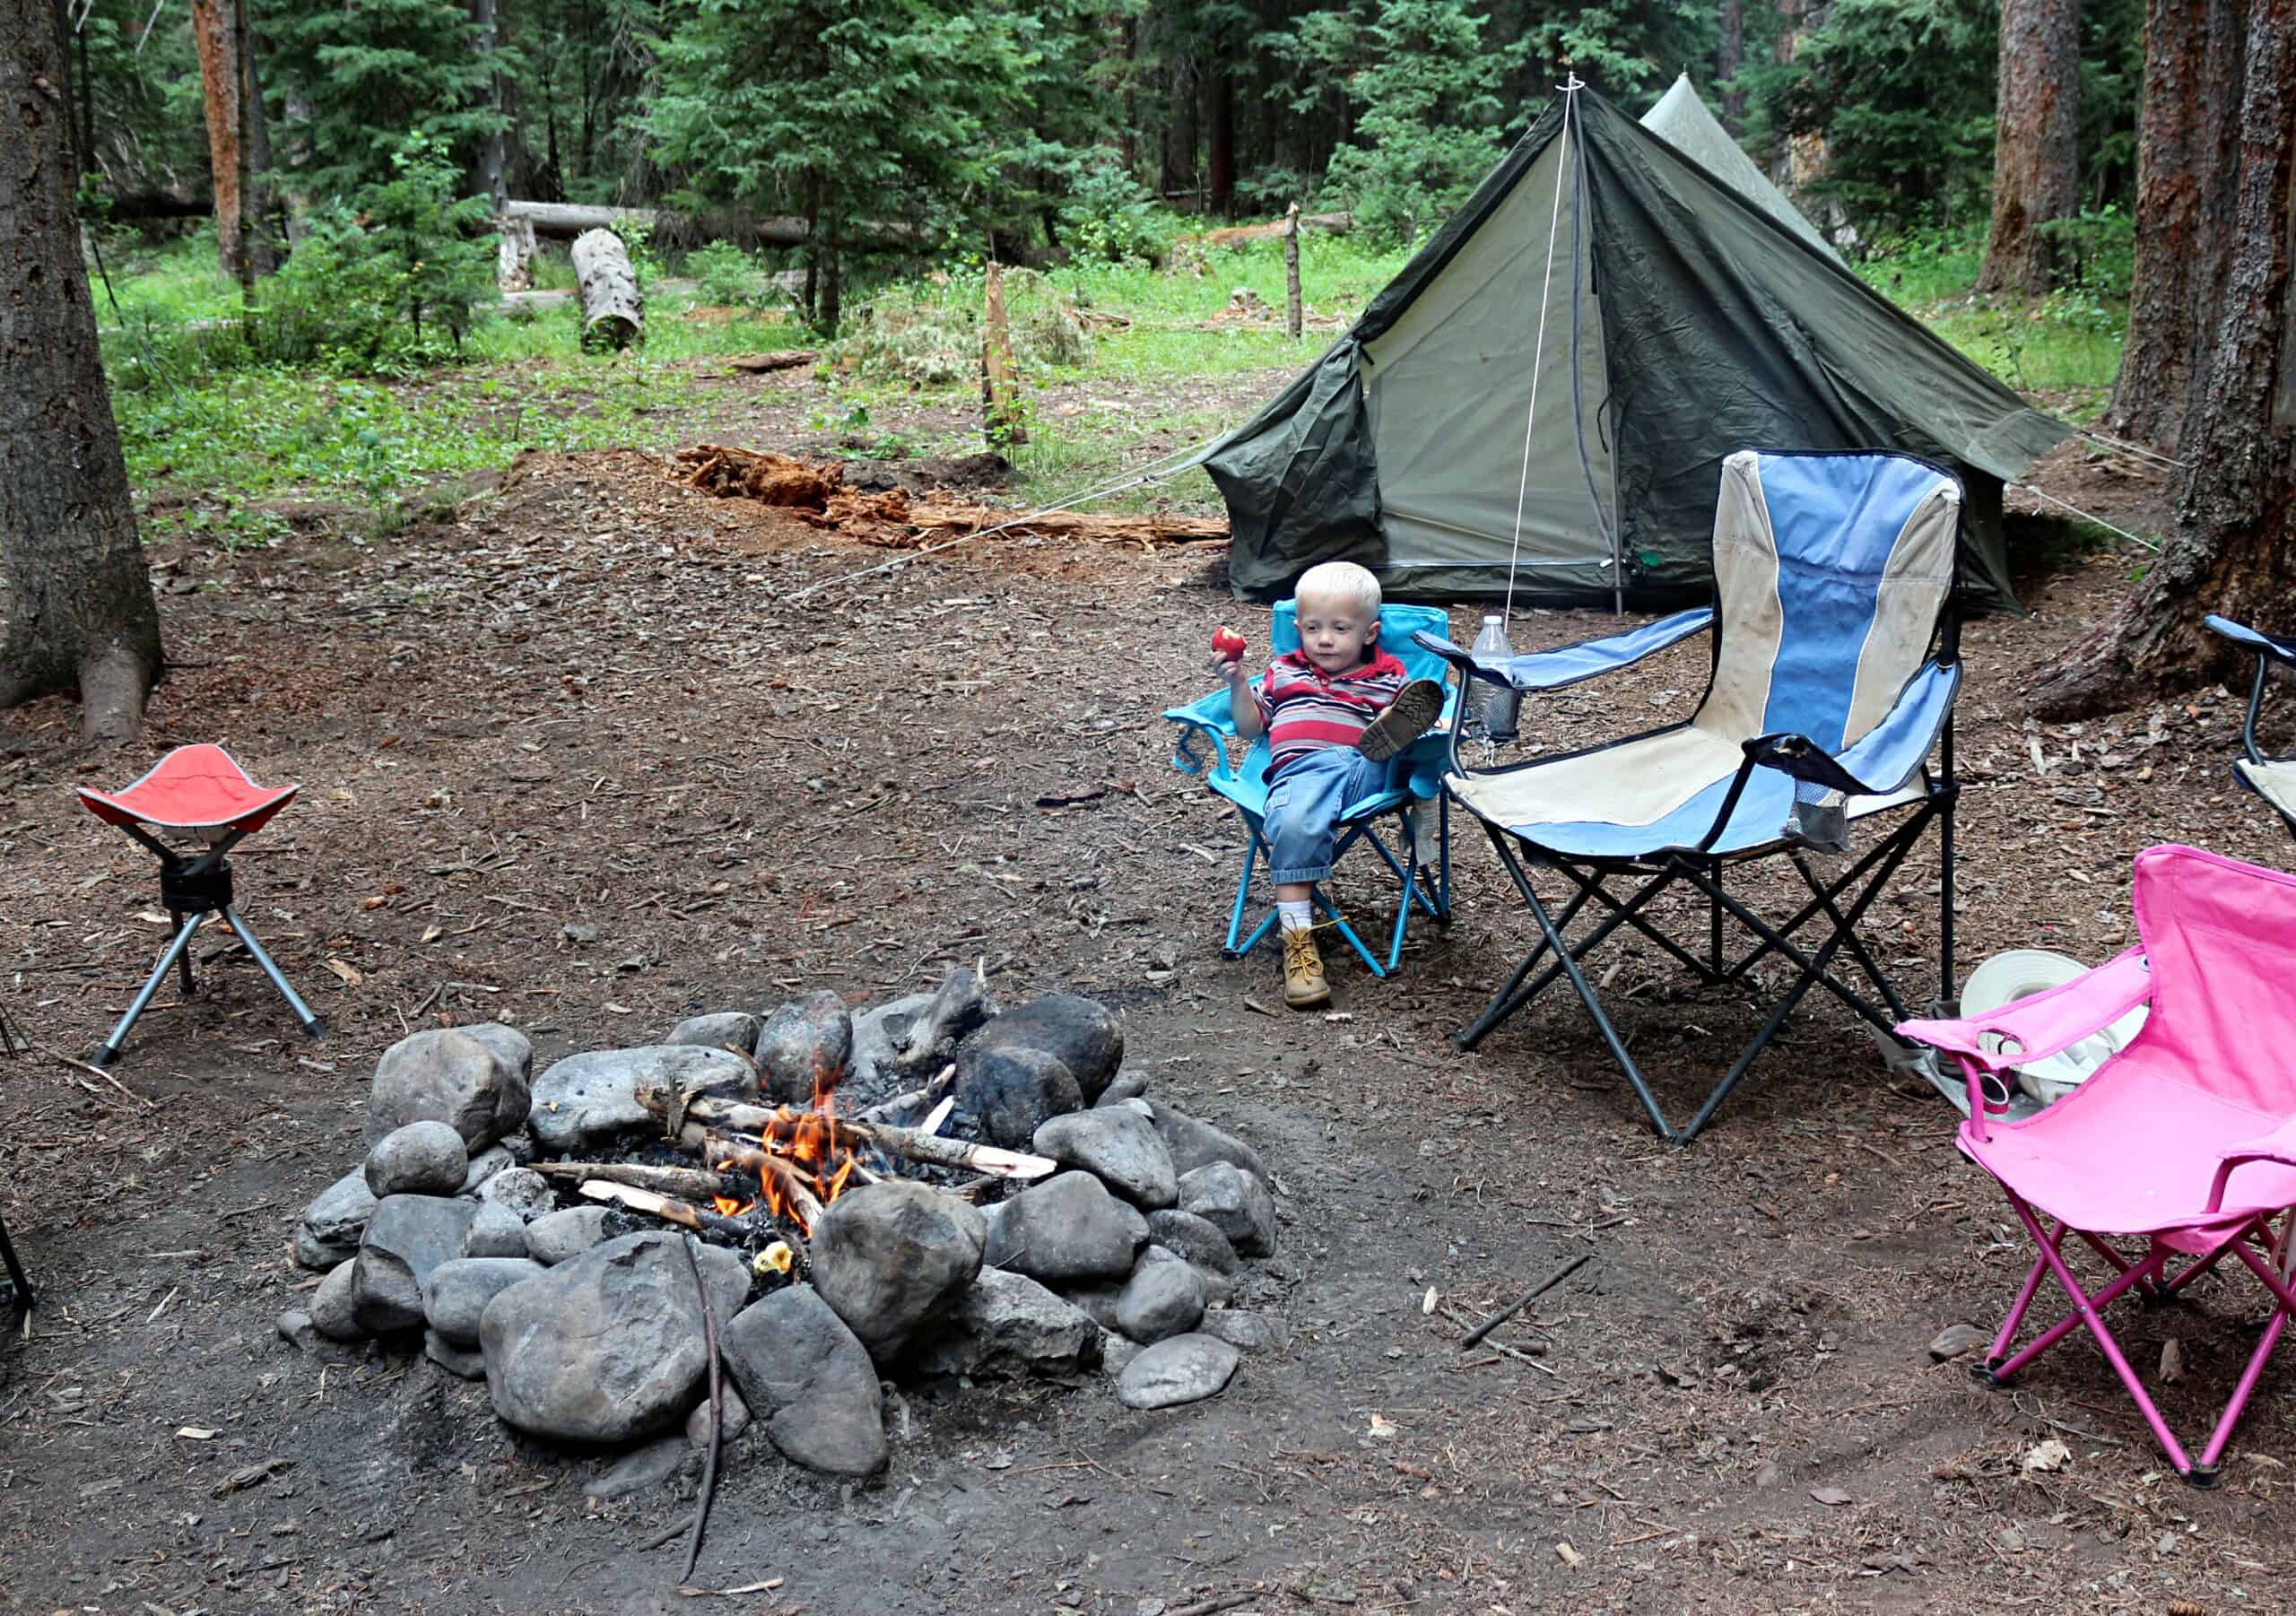 How Long Should Your First Family Camping Trip Be?